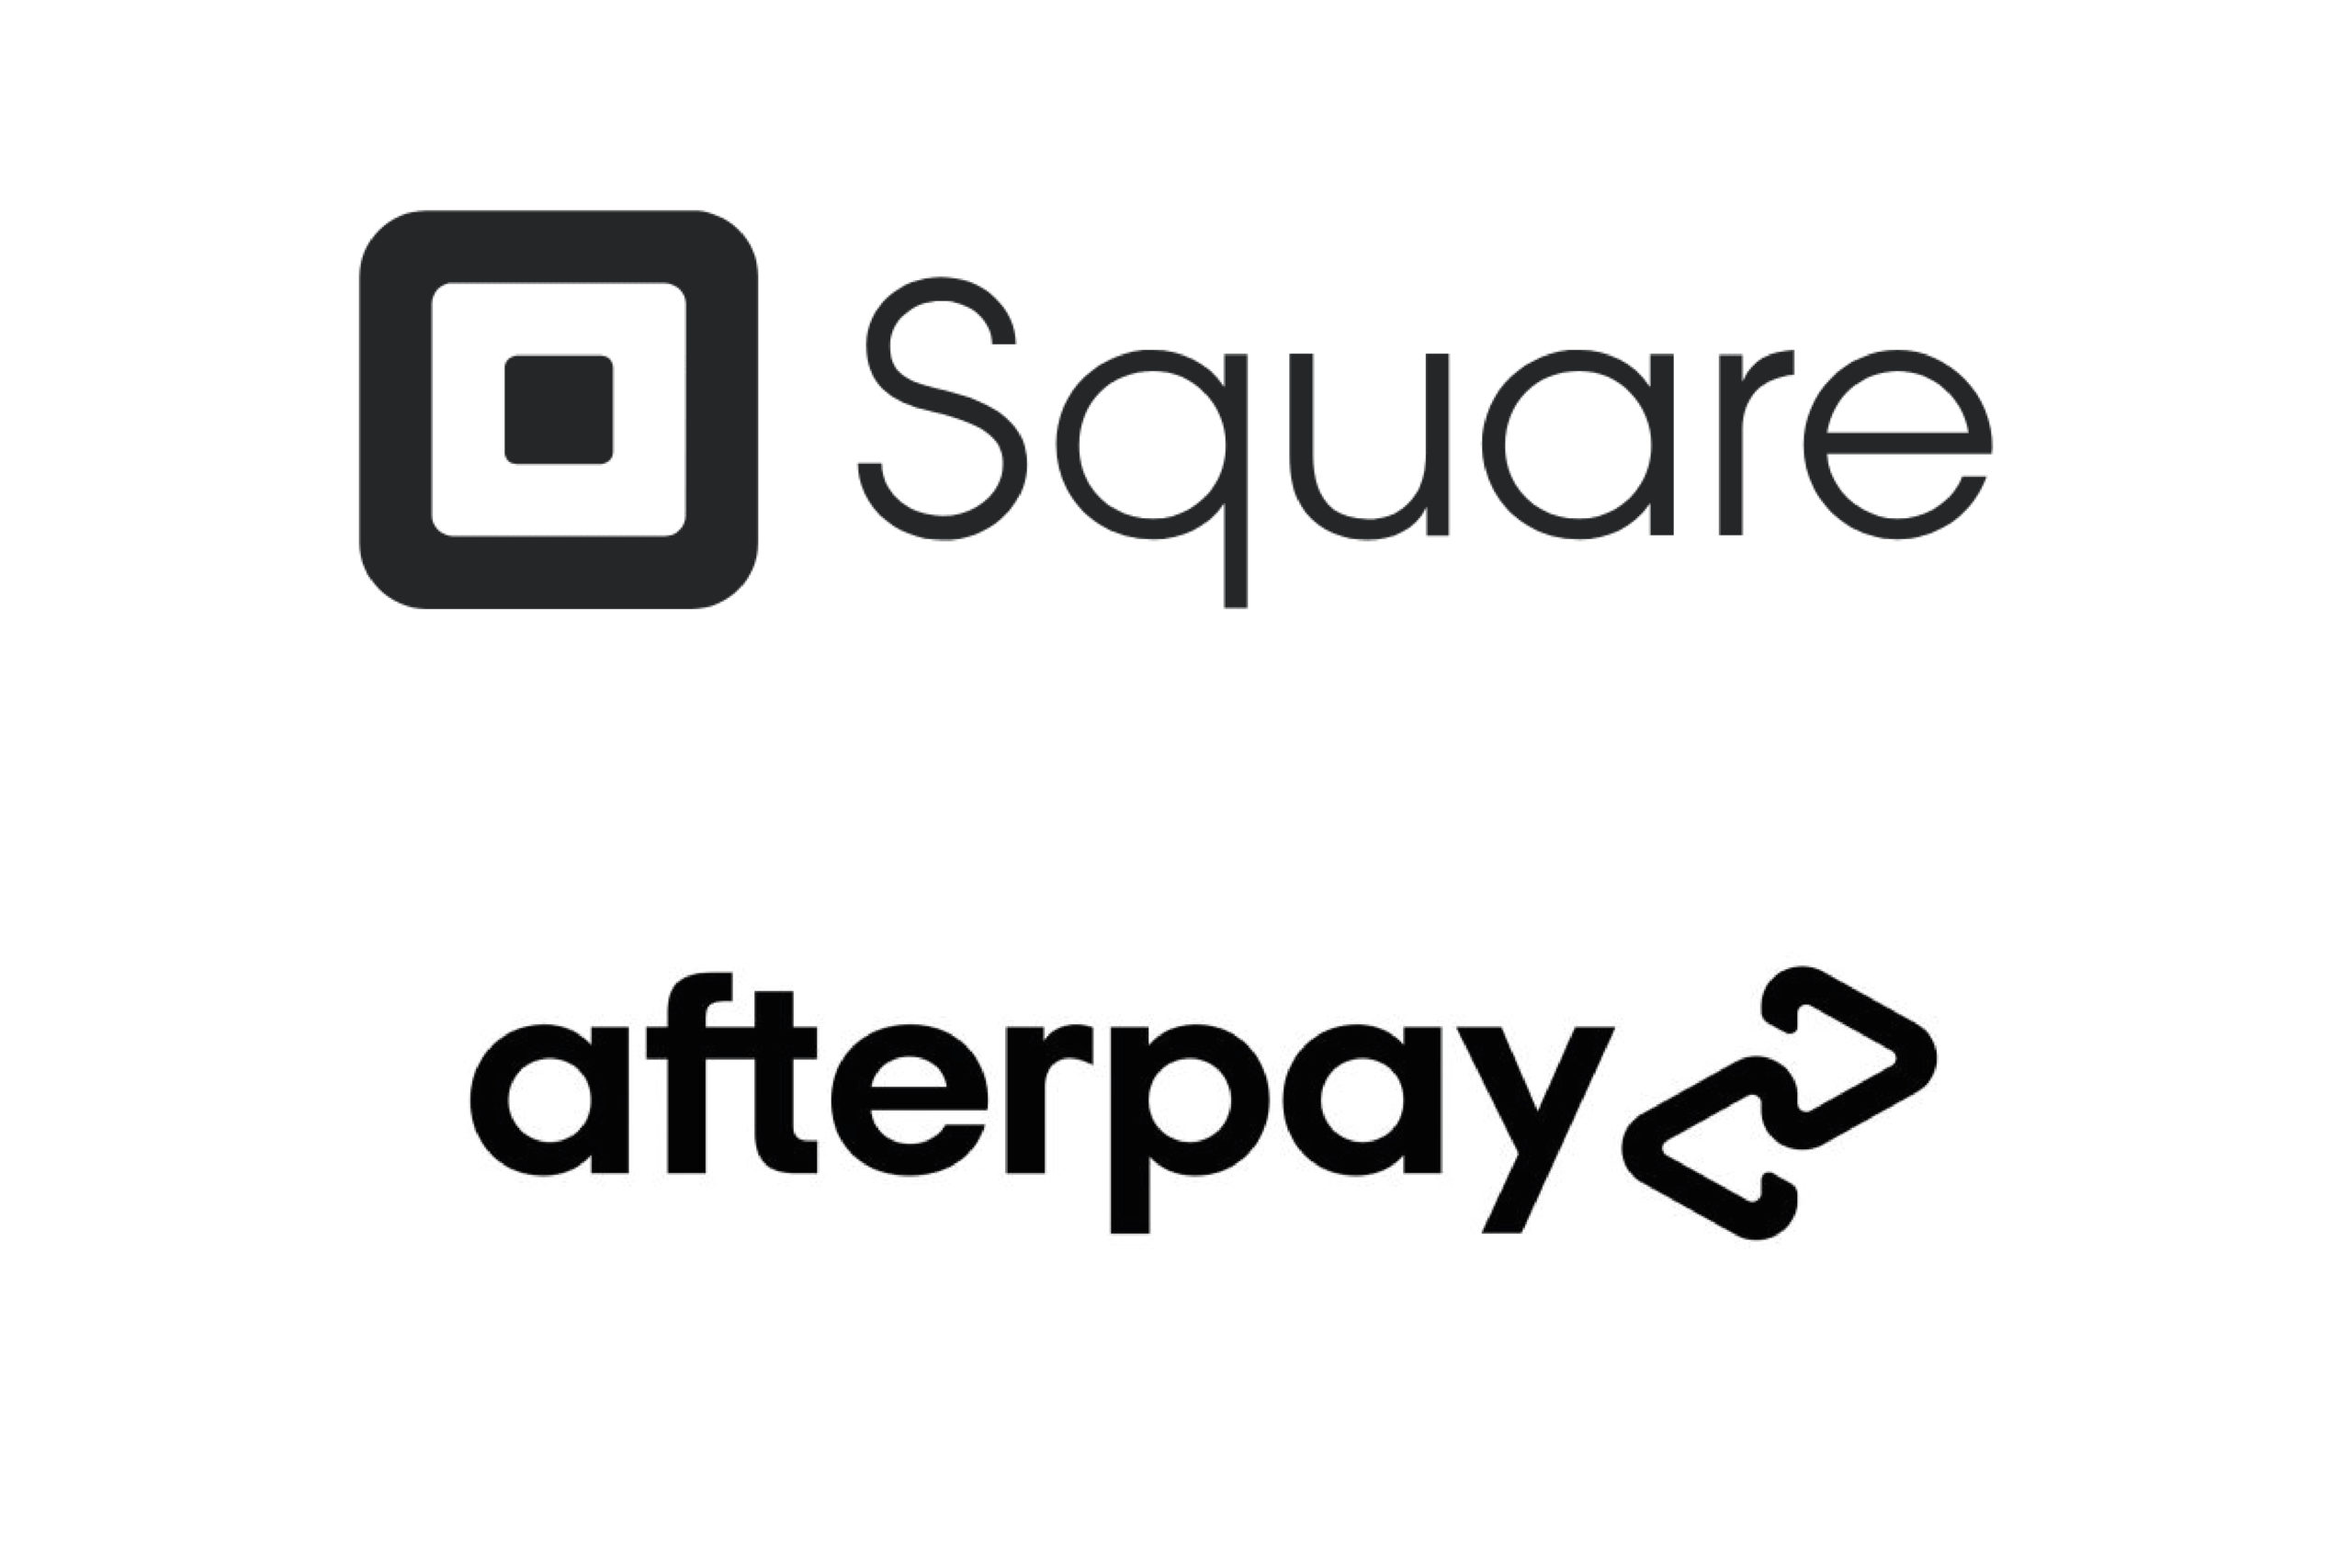 Square (SQ) changes name to Block; delays Afterpay merger vote